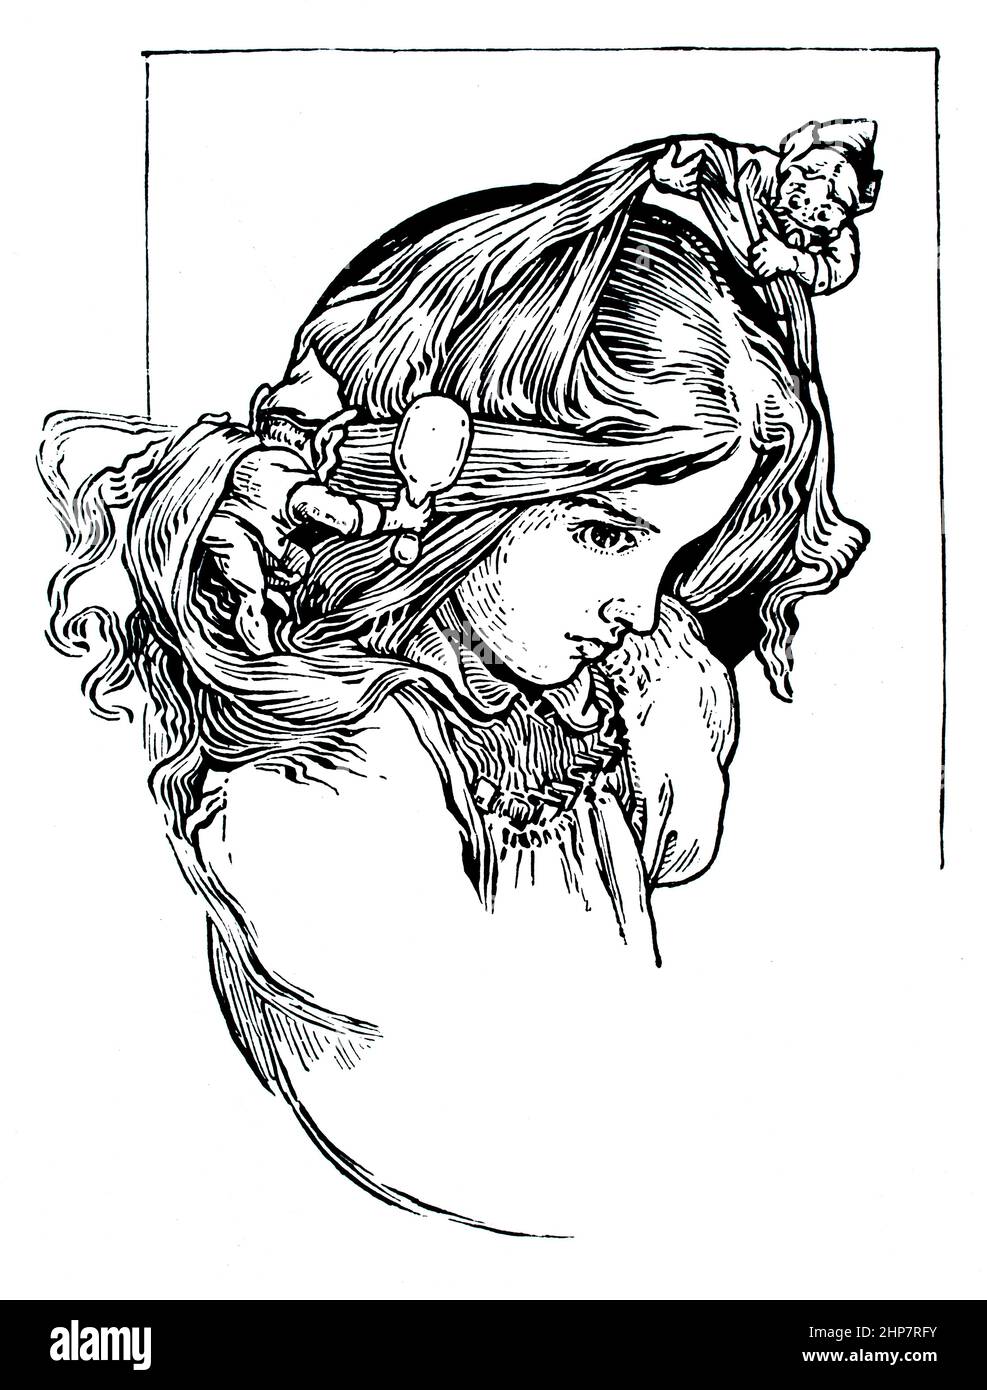 pixies brushing child’s hair, 1895 illustration by Archie MacGregor: from fantasy story Katawampus by author Edward Abbott Parry about imaginary illne Stock Photo